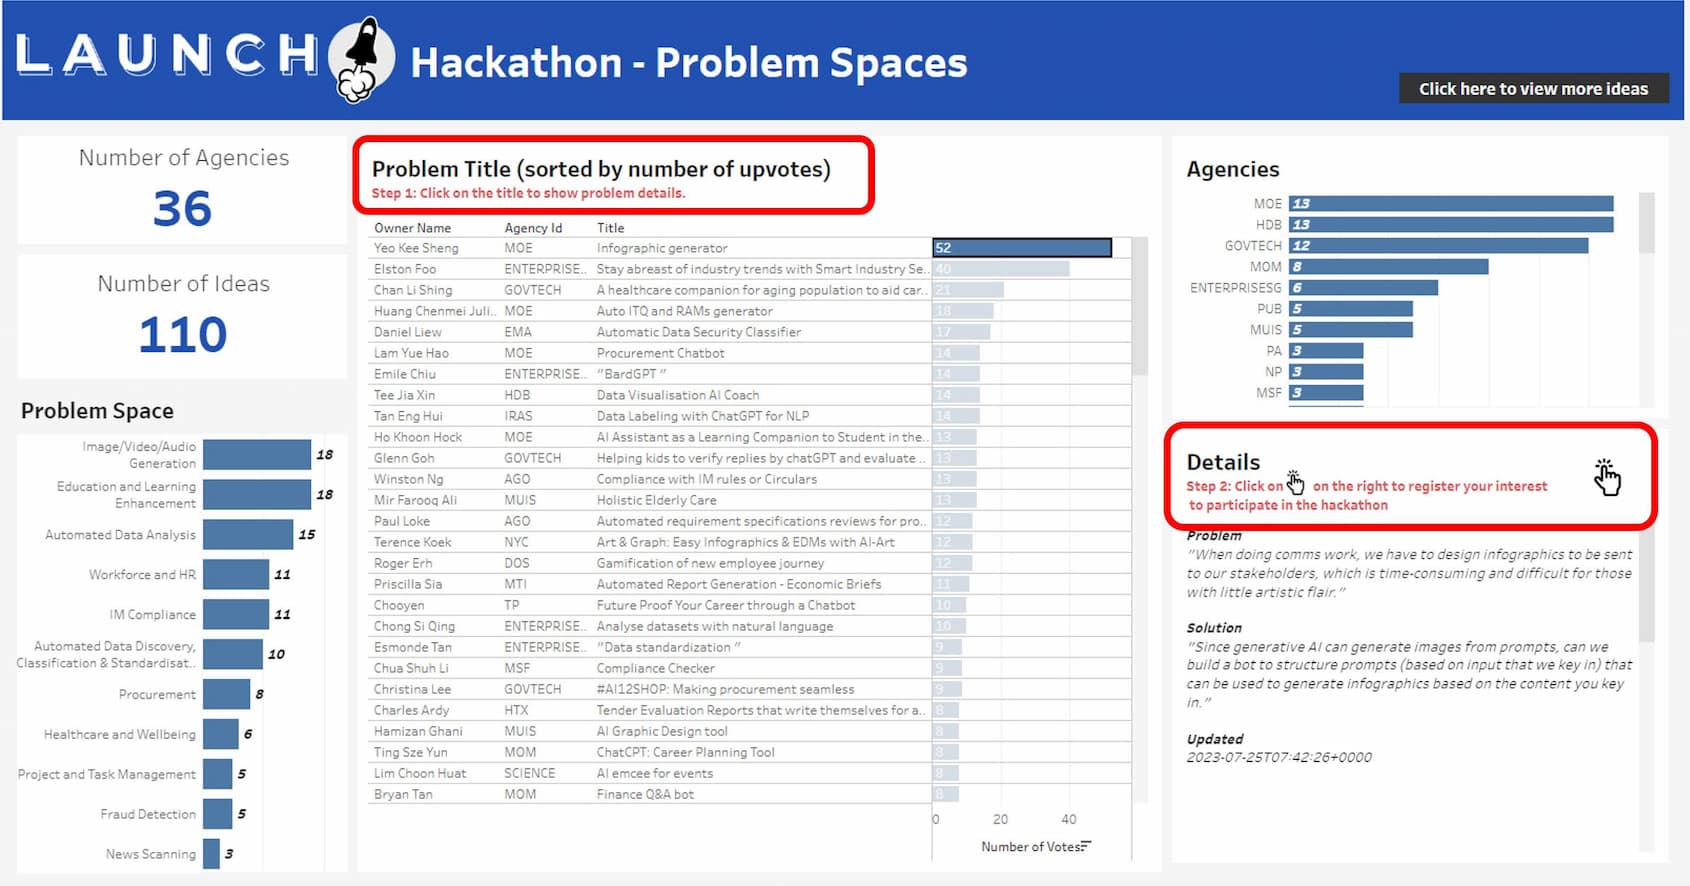 LAUNCH! Hackathon - selecting desired problem title and registration to participate in this event